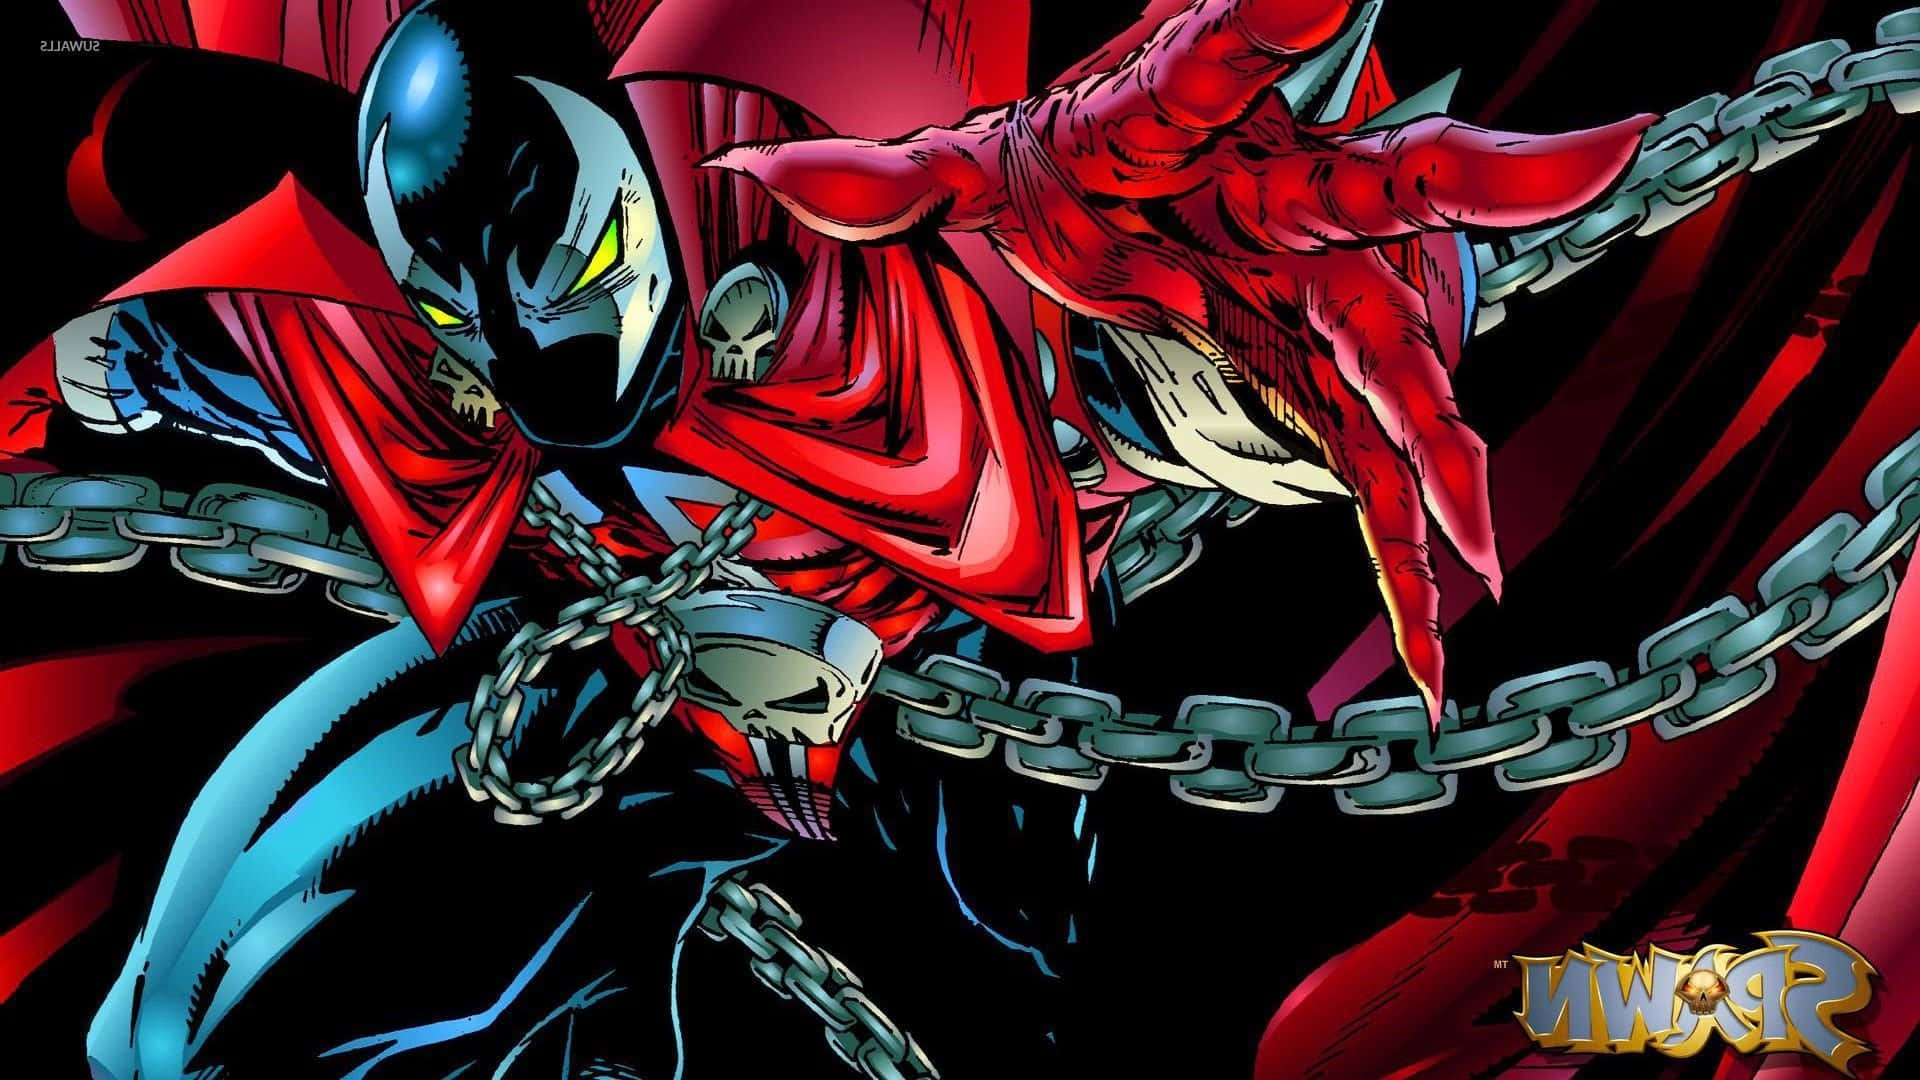 Crime fighter Spawn in action Wallpaper